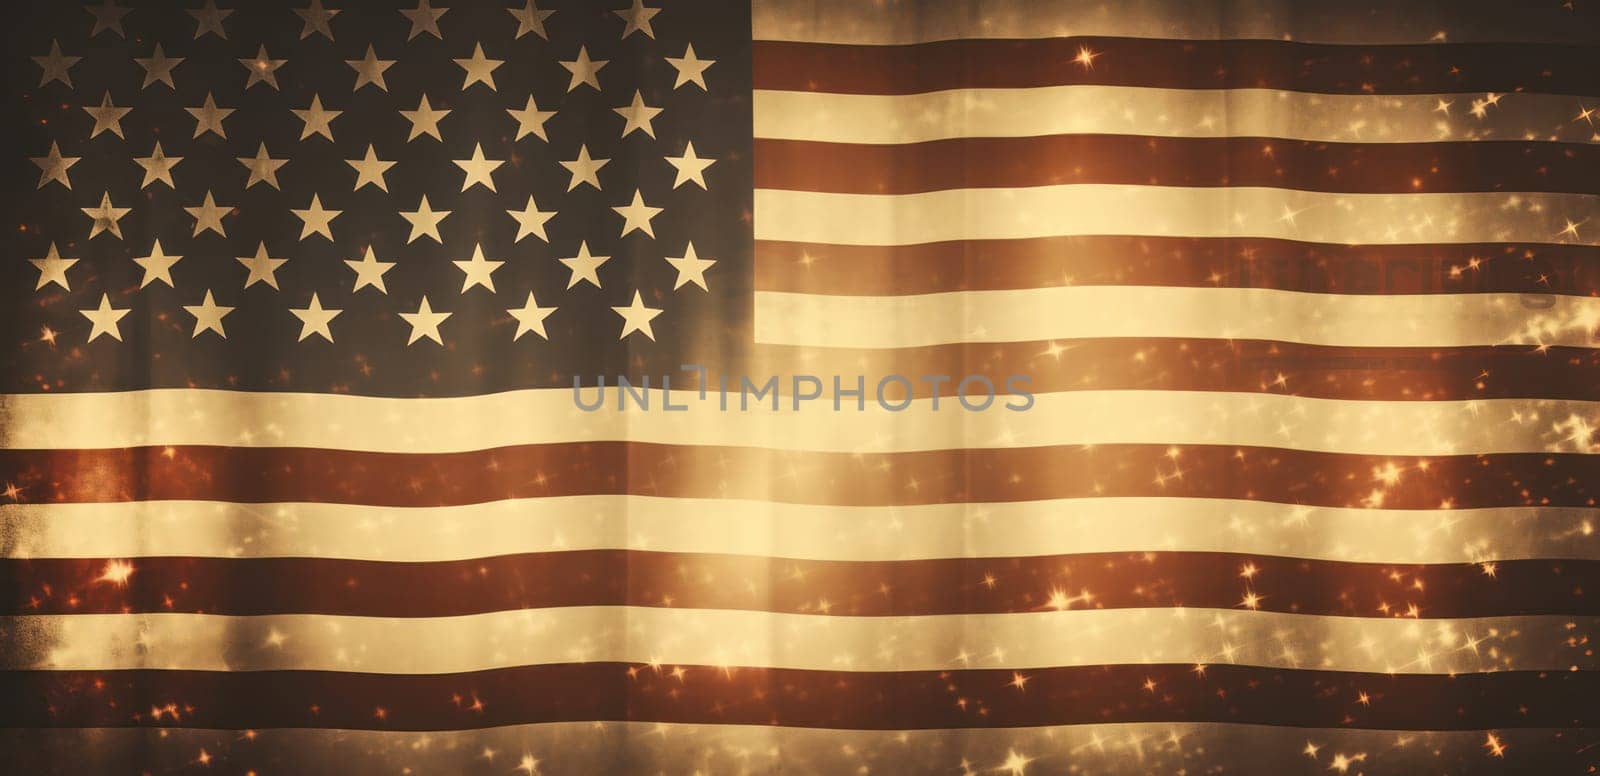 Faded Glory: A Weathered Vintage American Flag, Symbolic of Patriotism and Freedom, Against a Grunge and Textured Background